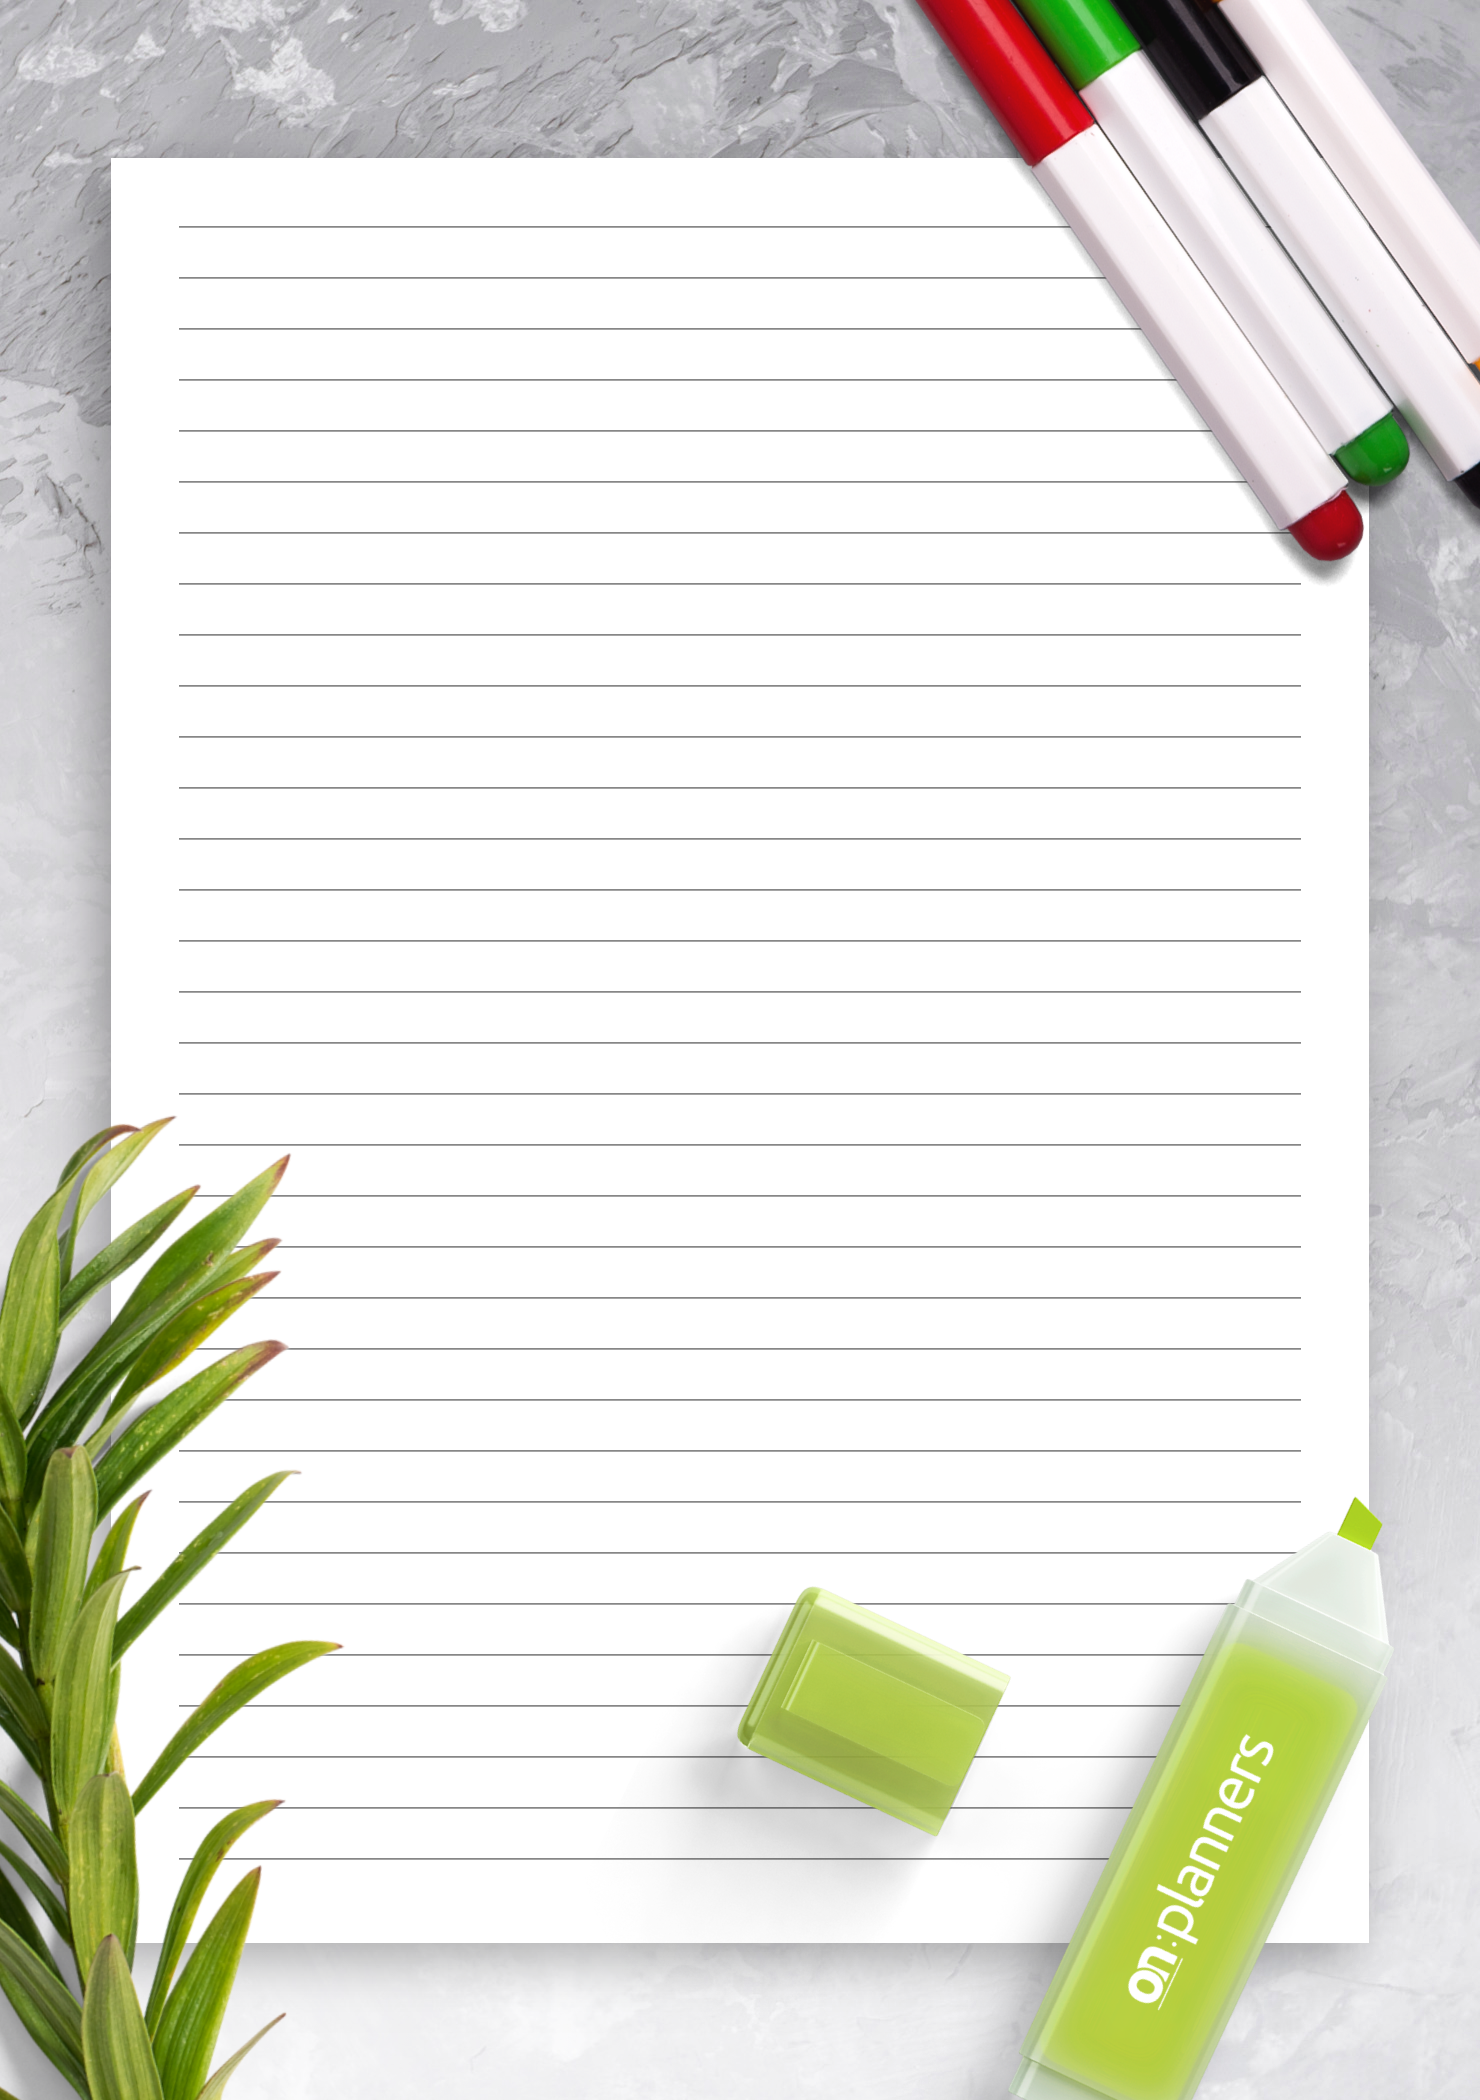 printable lined paper 7 best images of free printable lined paper with